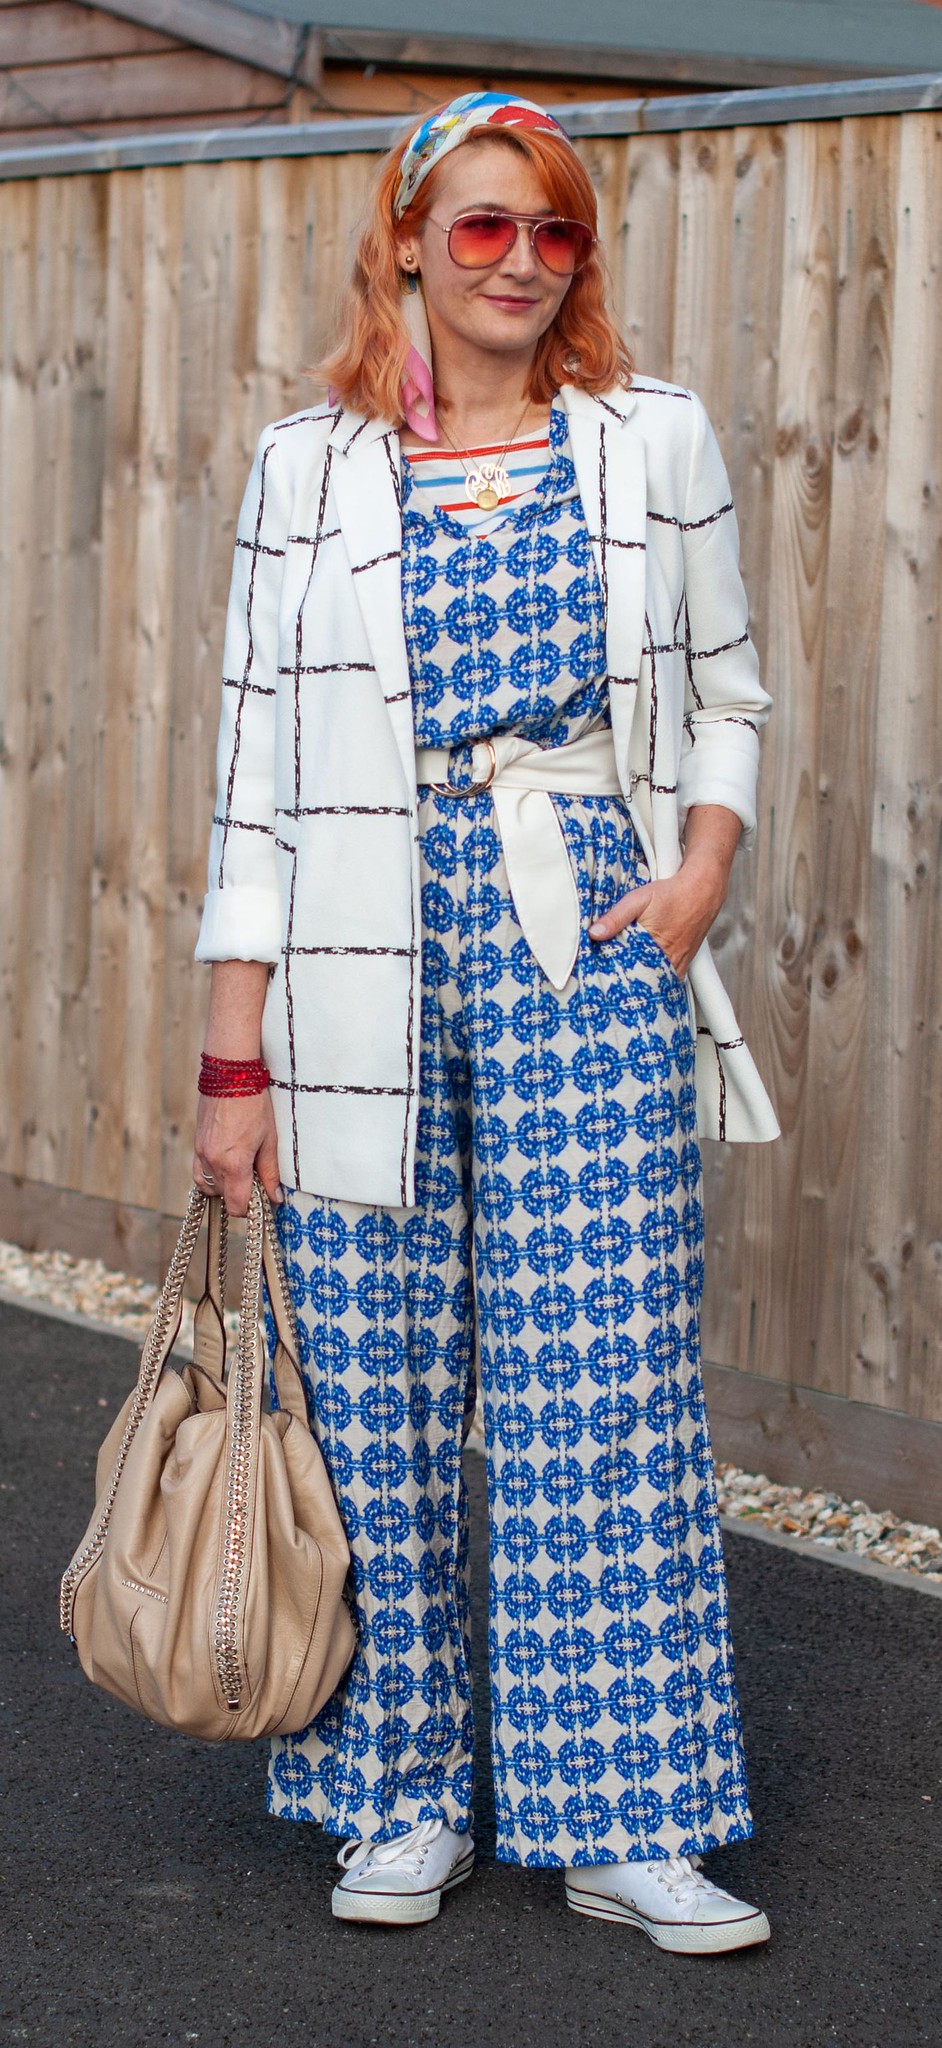 Styling a Summer Jumpsuit in Autumn With Serious Pattern Mixing: Blue patterned jumpsuit, black and white windowpane check jacket, white tennis shoes | Not Dressed As Lamb, over 40 fashion blogger